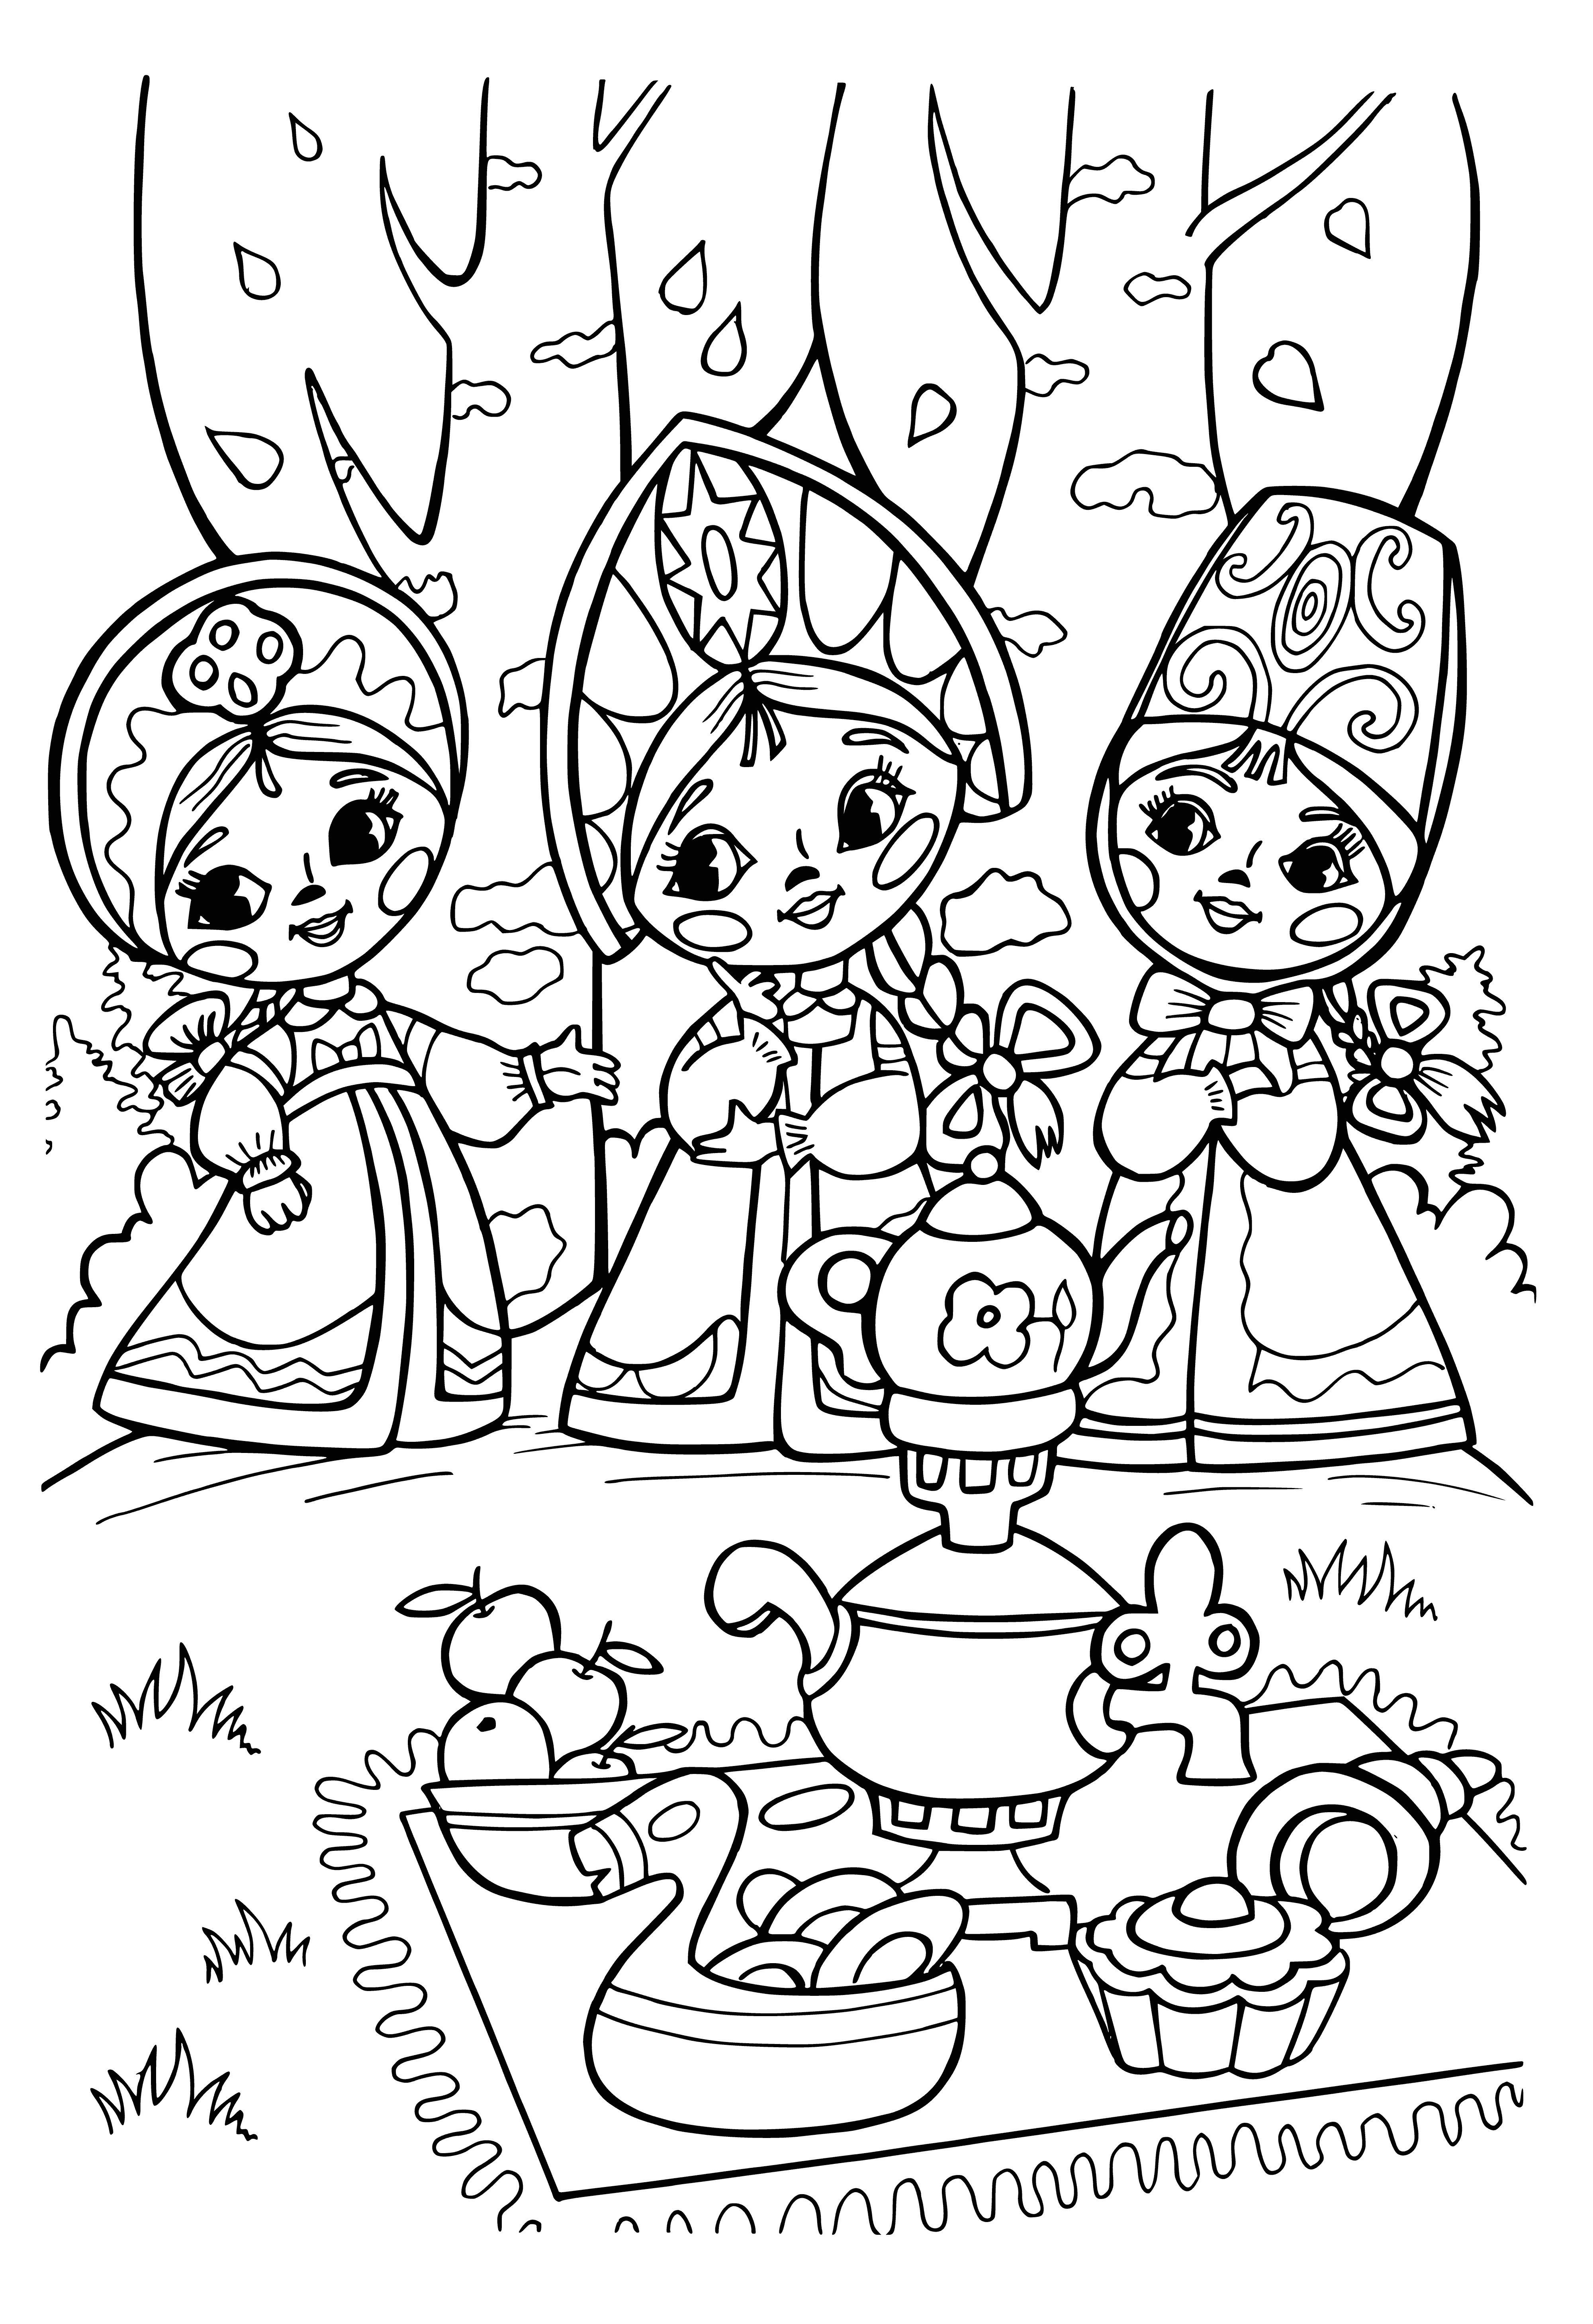 coloring page: Young people in distant kingdom find support & fun in Vasilis Club: library, computer lab, gym & game room.